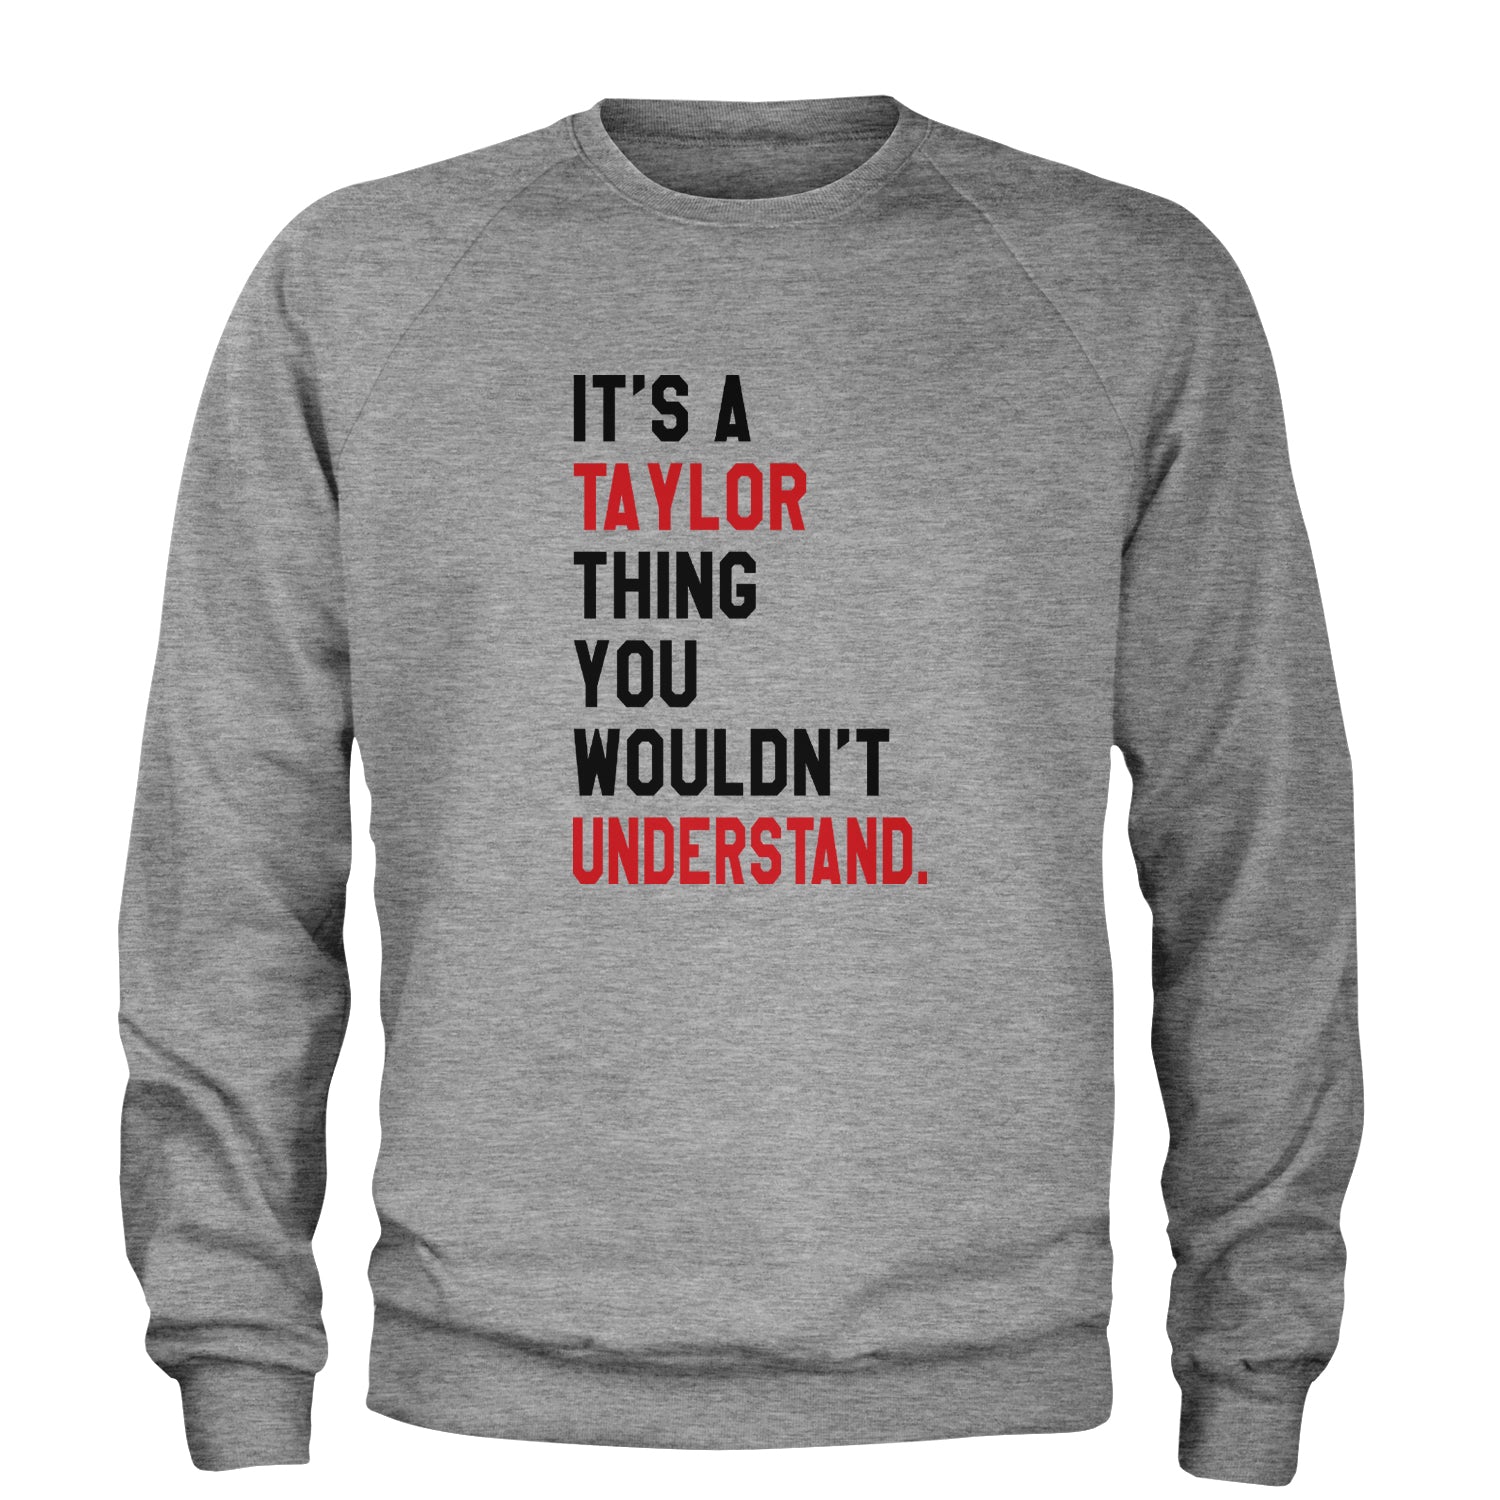 You Wouldn't Understand It's A Taylor Thing TTPD Adult Crewneck Sweatshirt